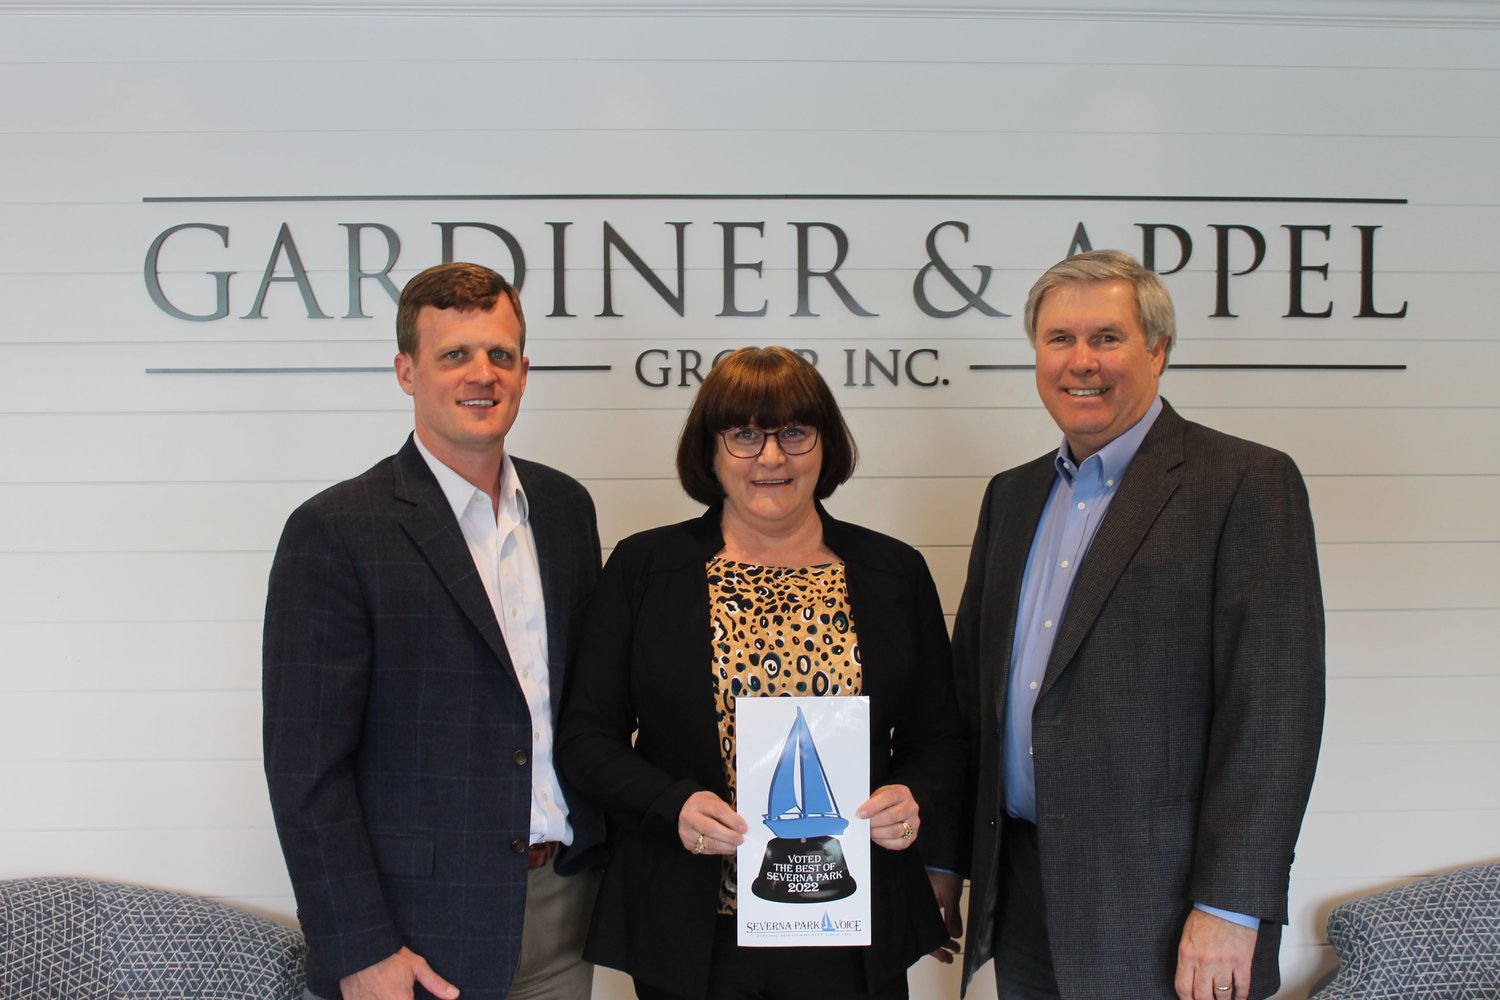 Best Accountant goes to Gardiner & Appel with partners (l-r) Patrick Cassilly, Debra Feather and Karl Appel.